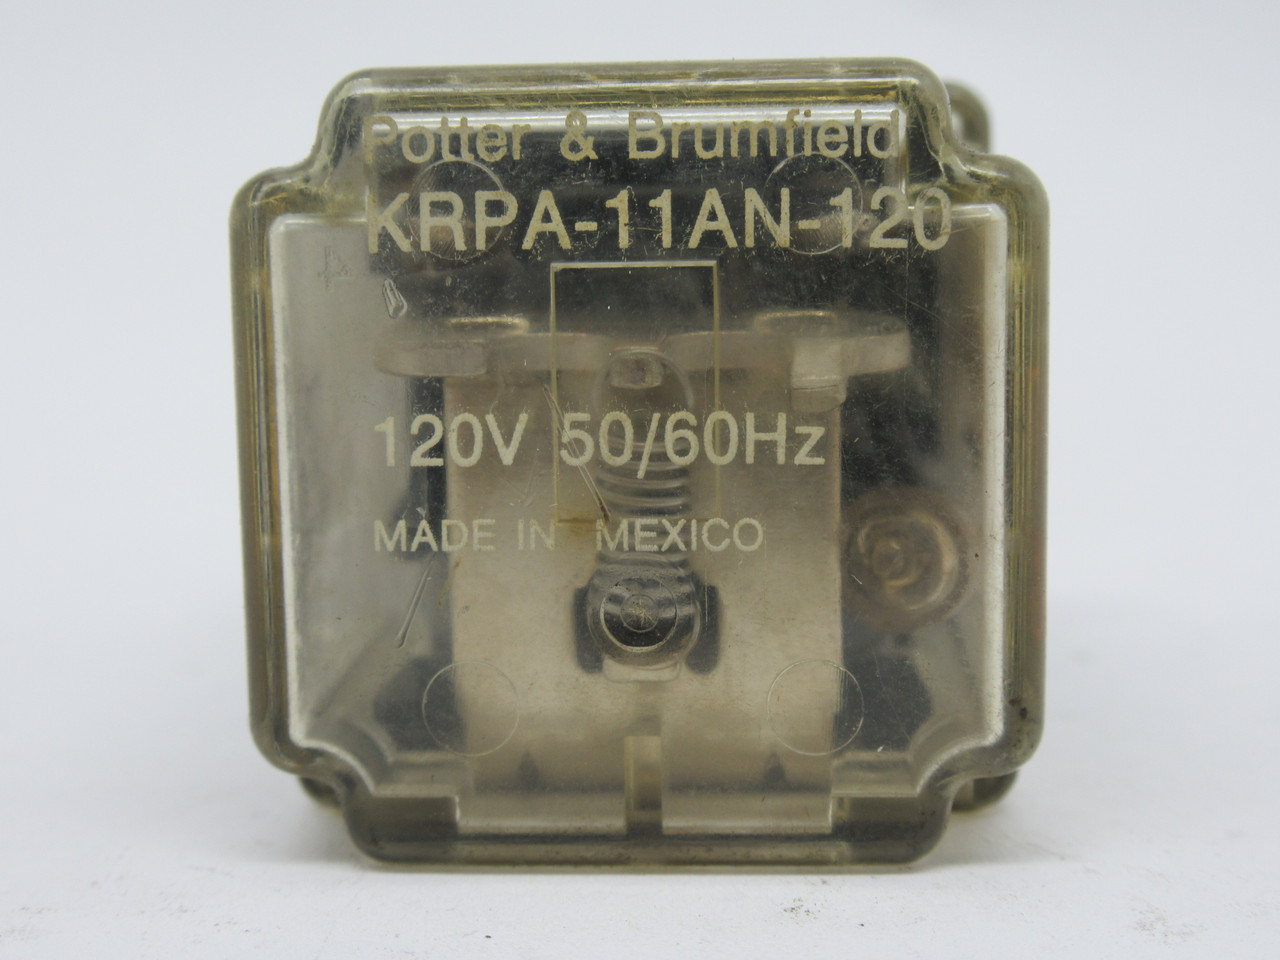 Potter & Brumfield KRPA-11AN-120 Plug-in Relay 120V 50/60Hz 8-Pin 1/6HP USED